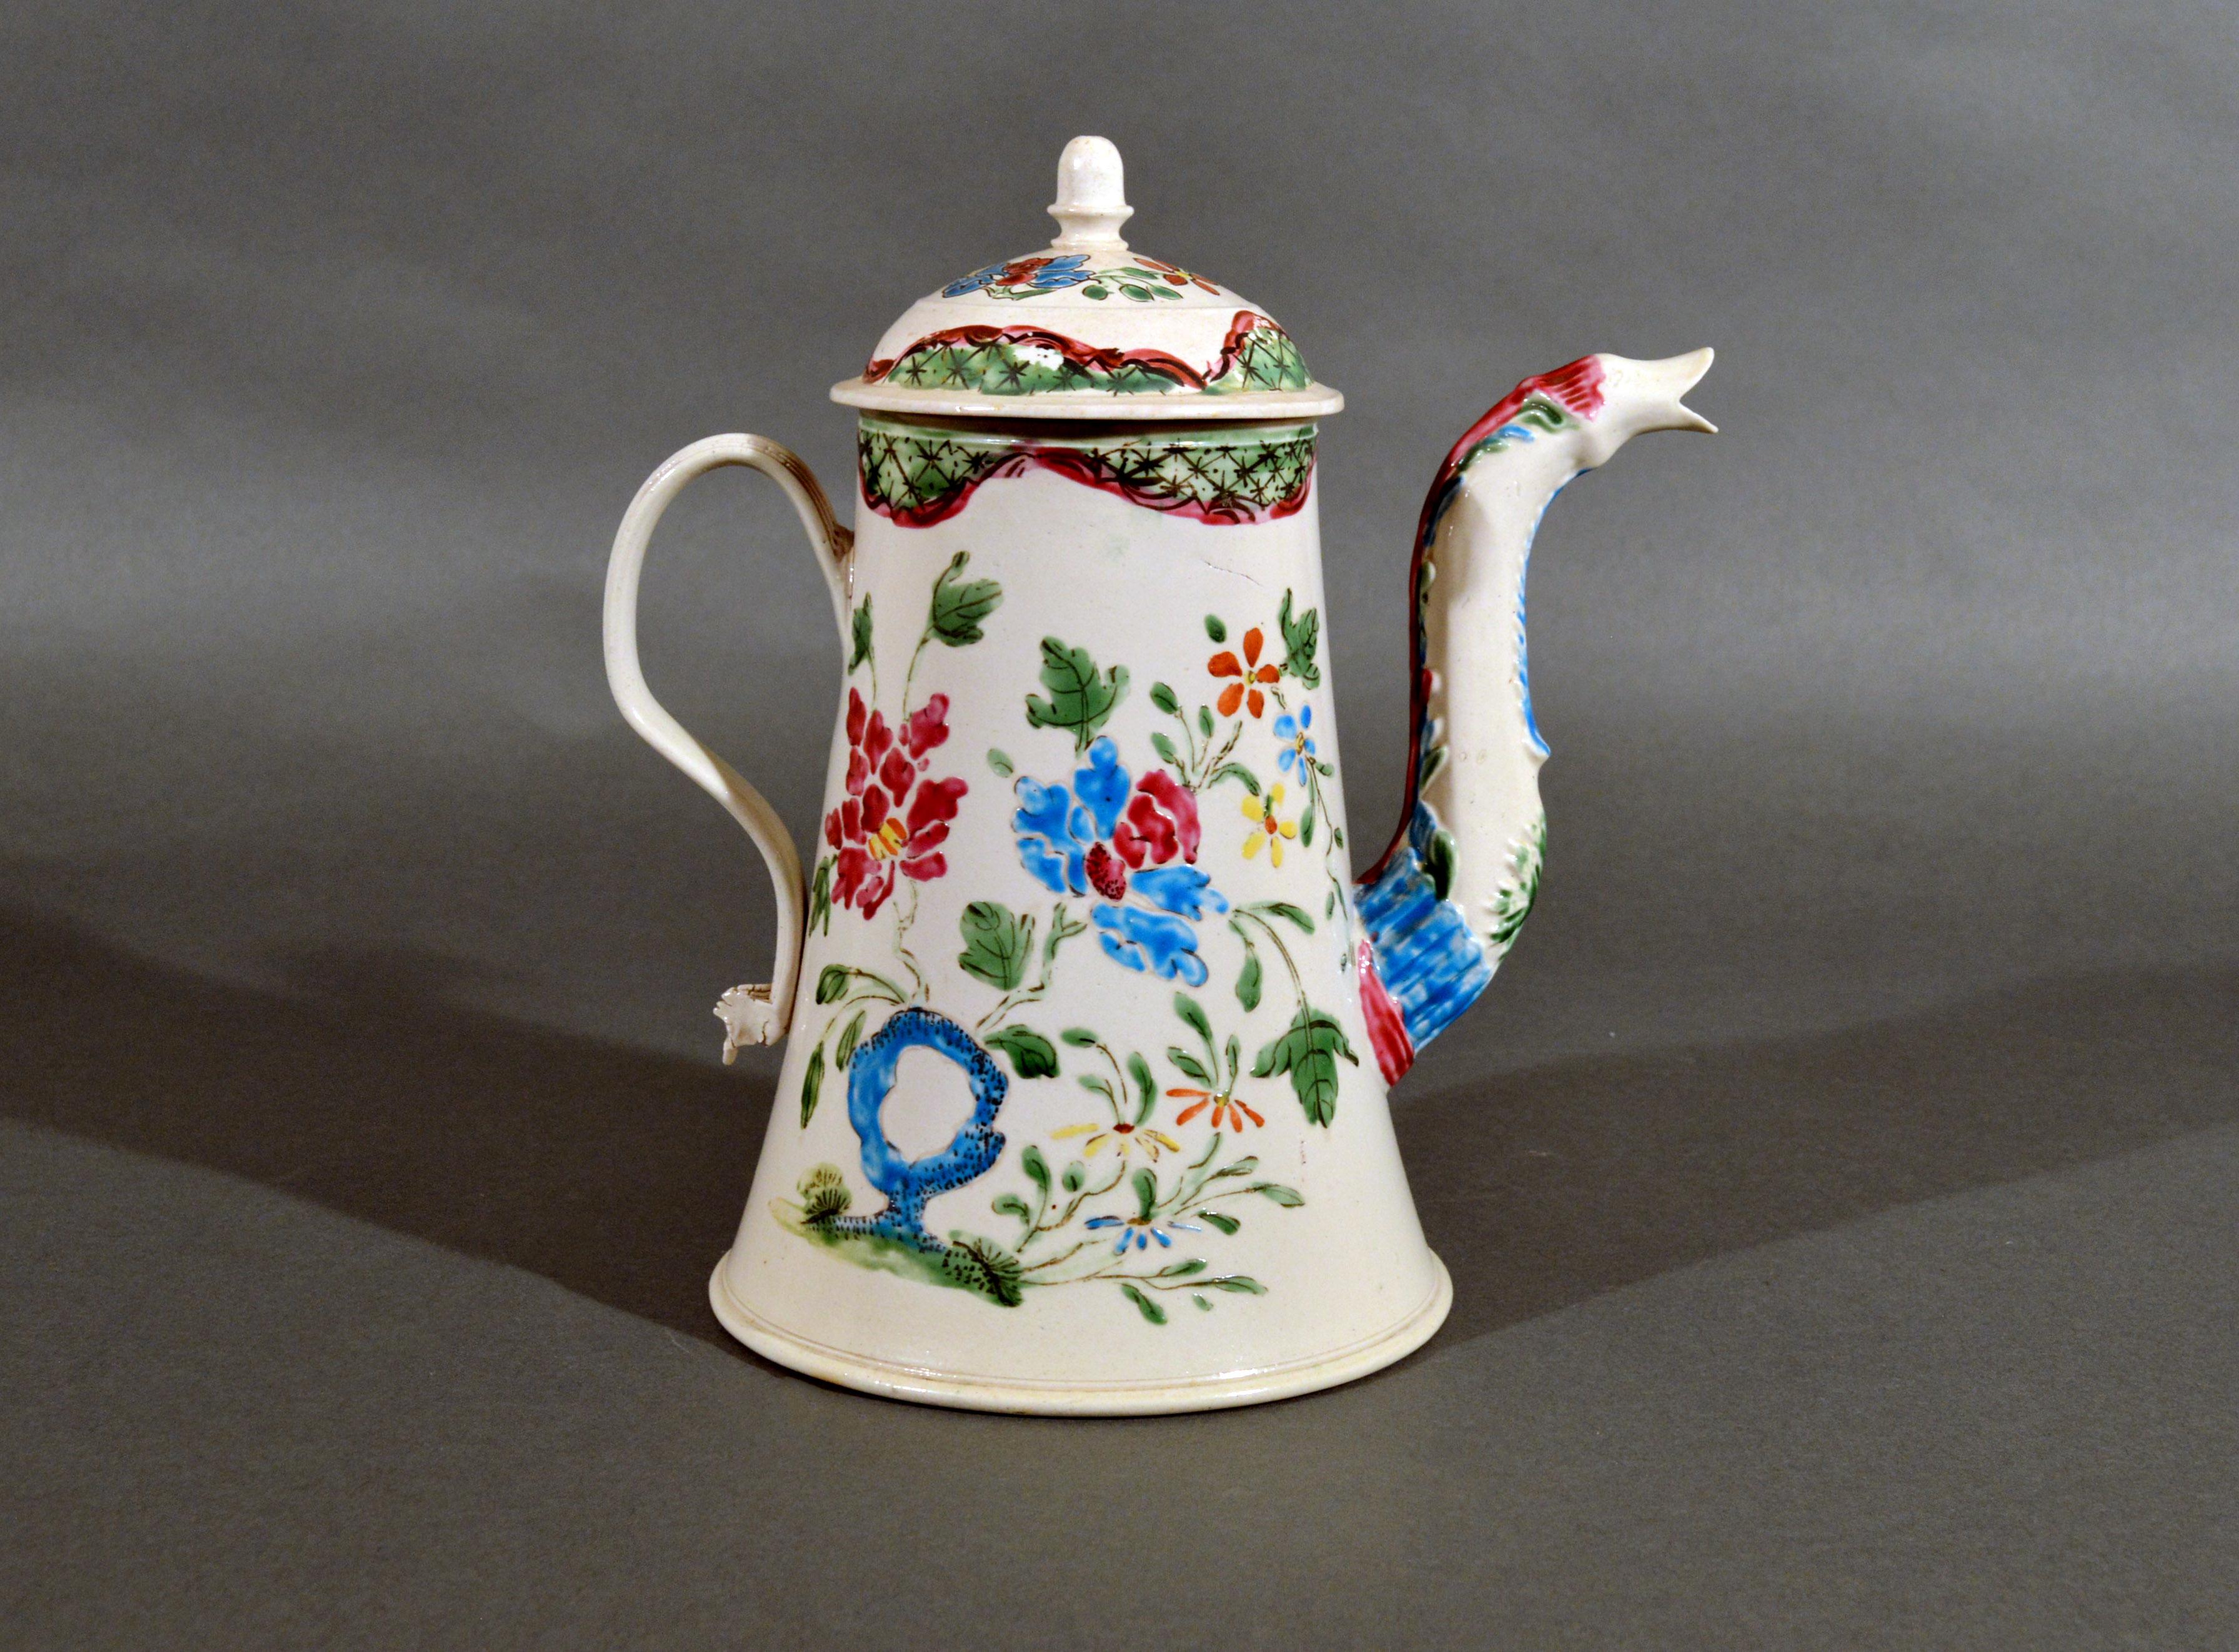 Staffordshire enameled salt glaze stoneware chinoiserie coffee pot and cover,
circa 1760, 
    

The pot with flaring foot is decorated with Chinese-style 